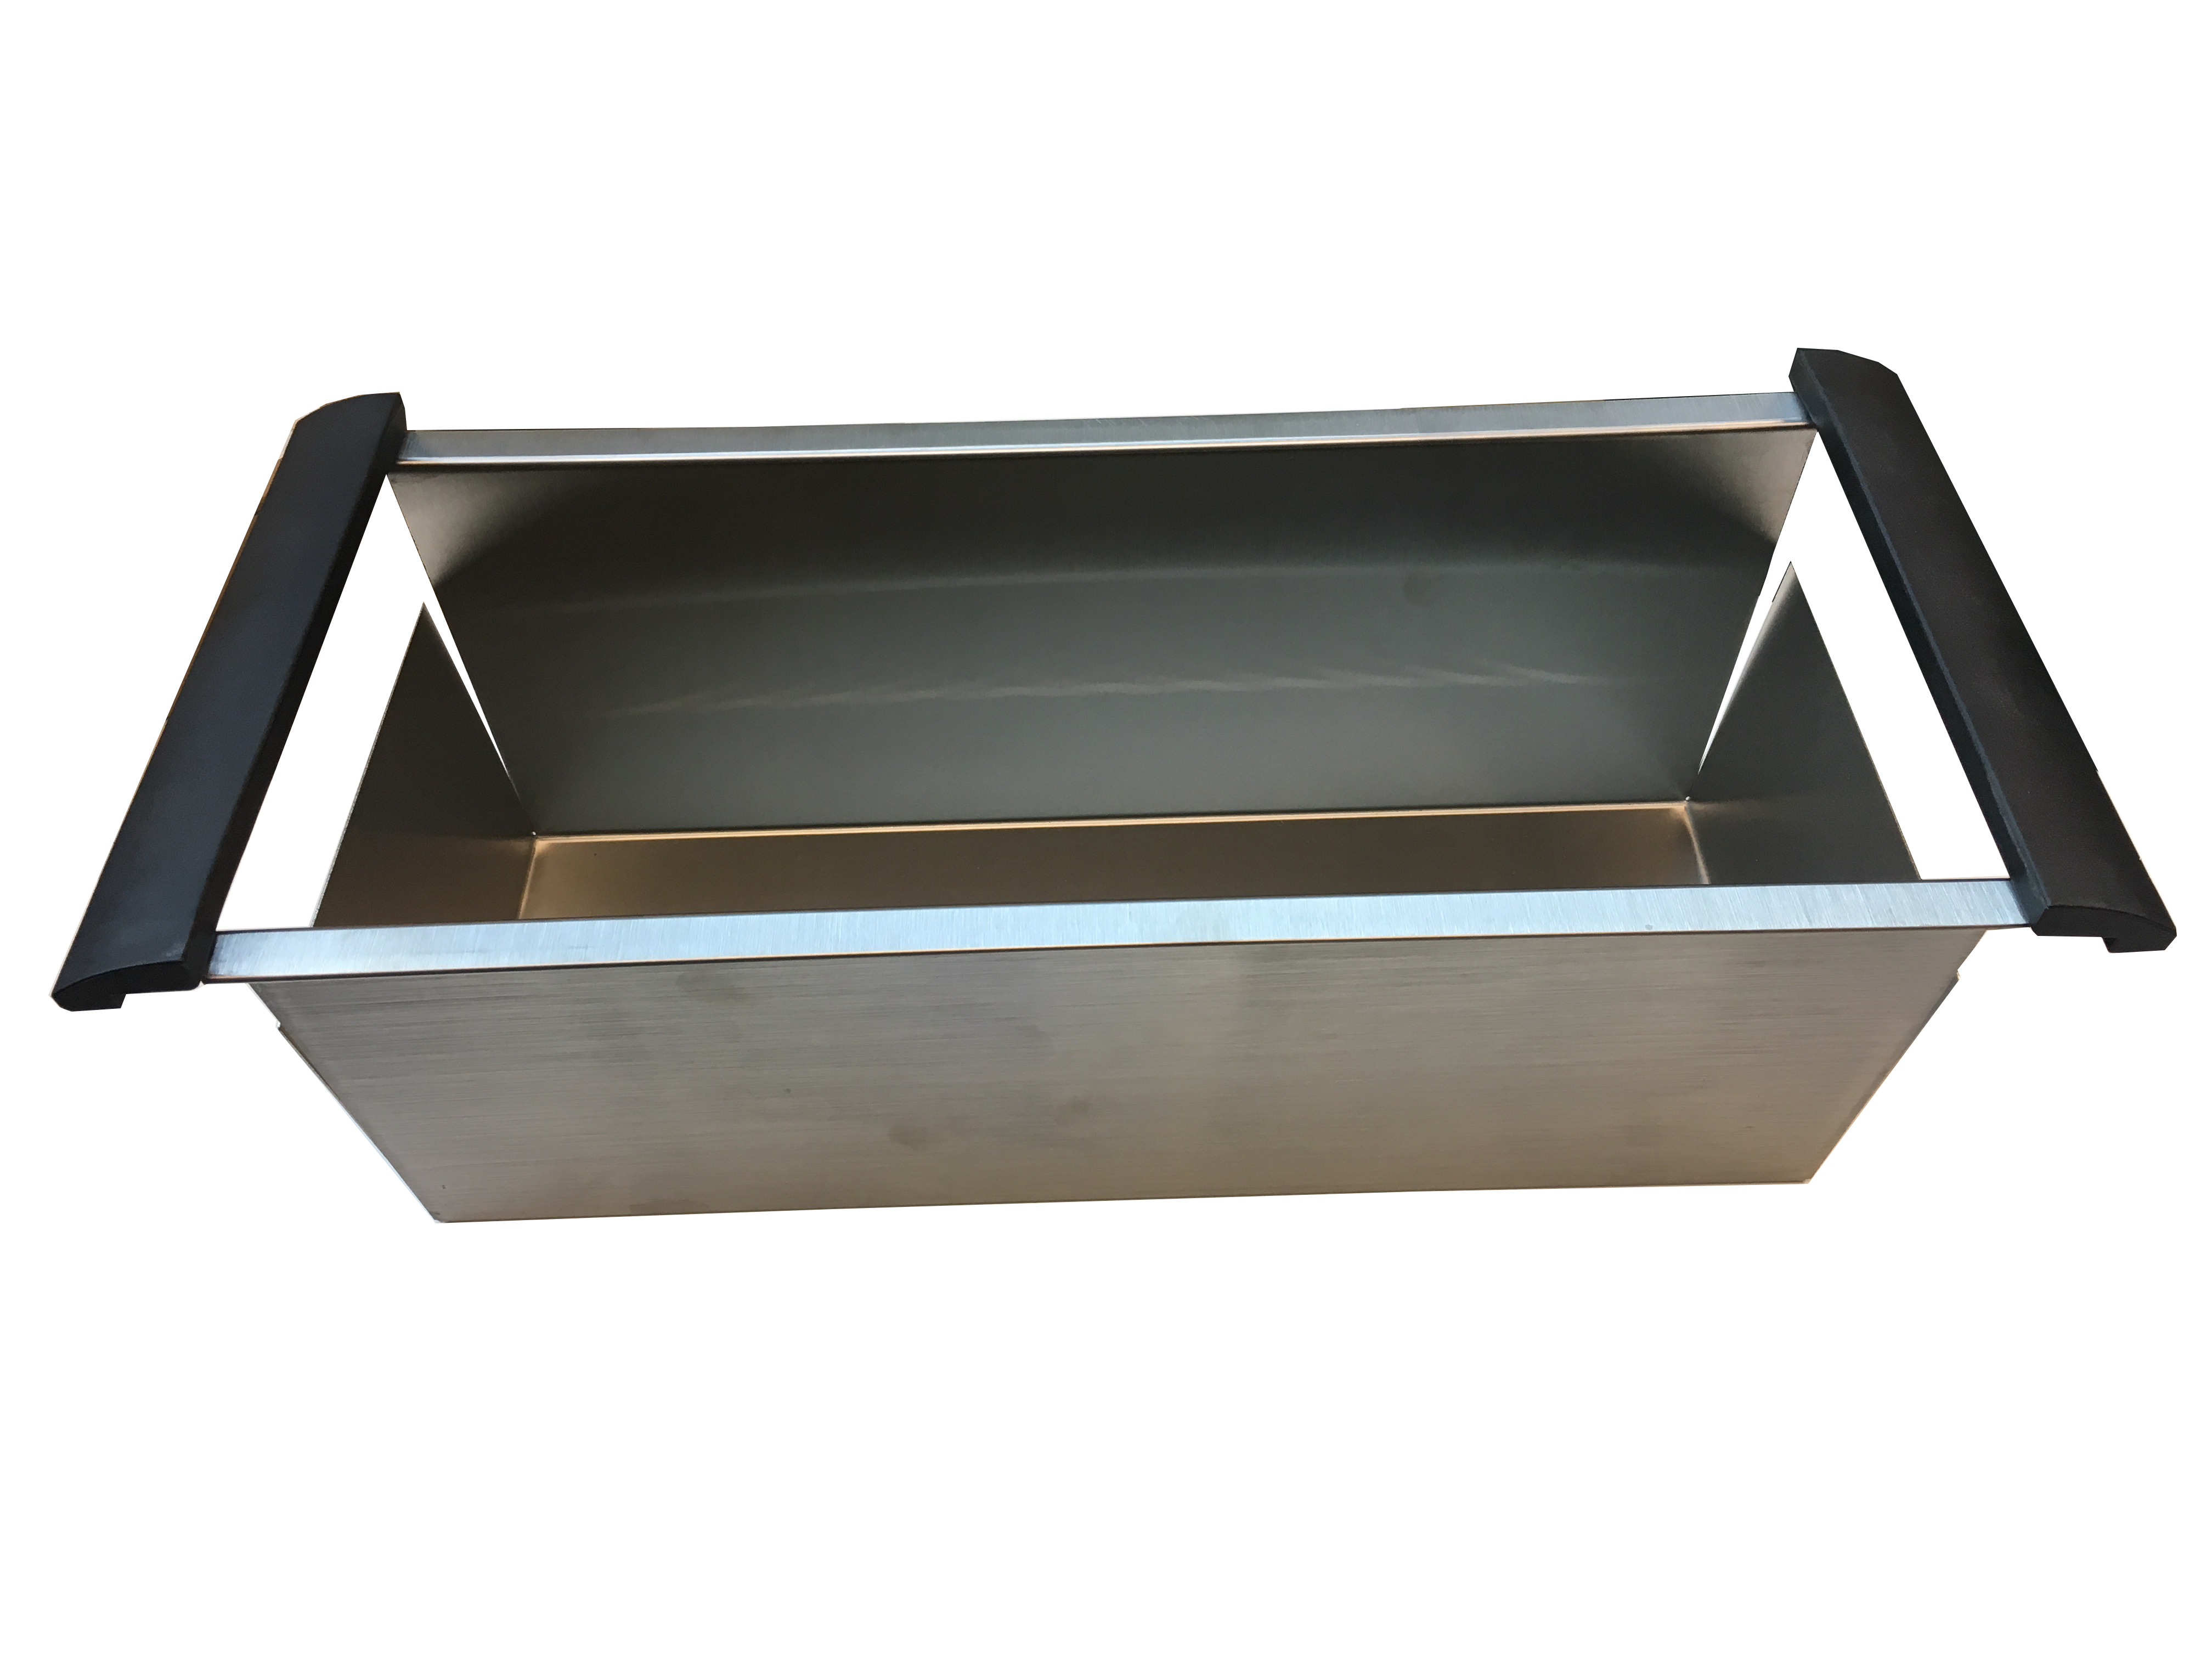 Stainless Steel Draining Basket with Rubber Handles - 984001 for